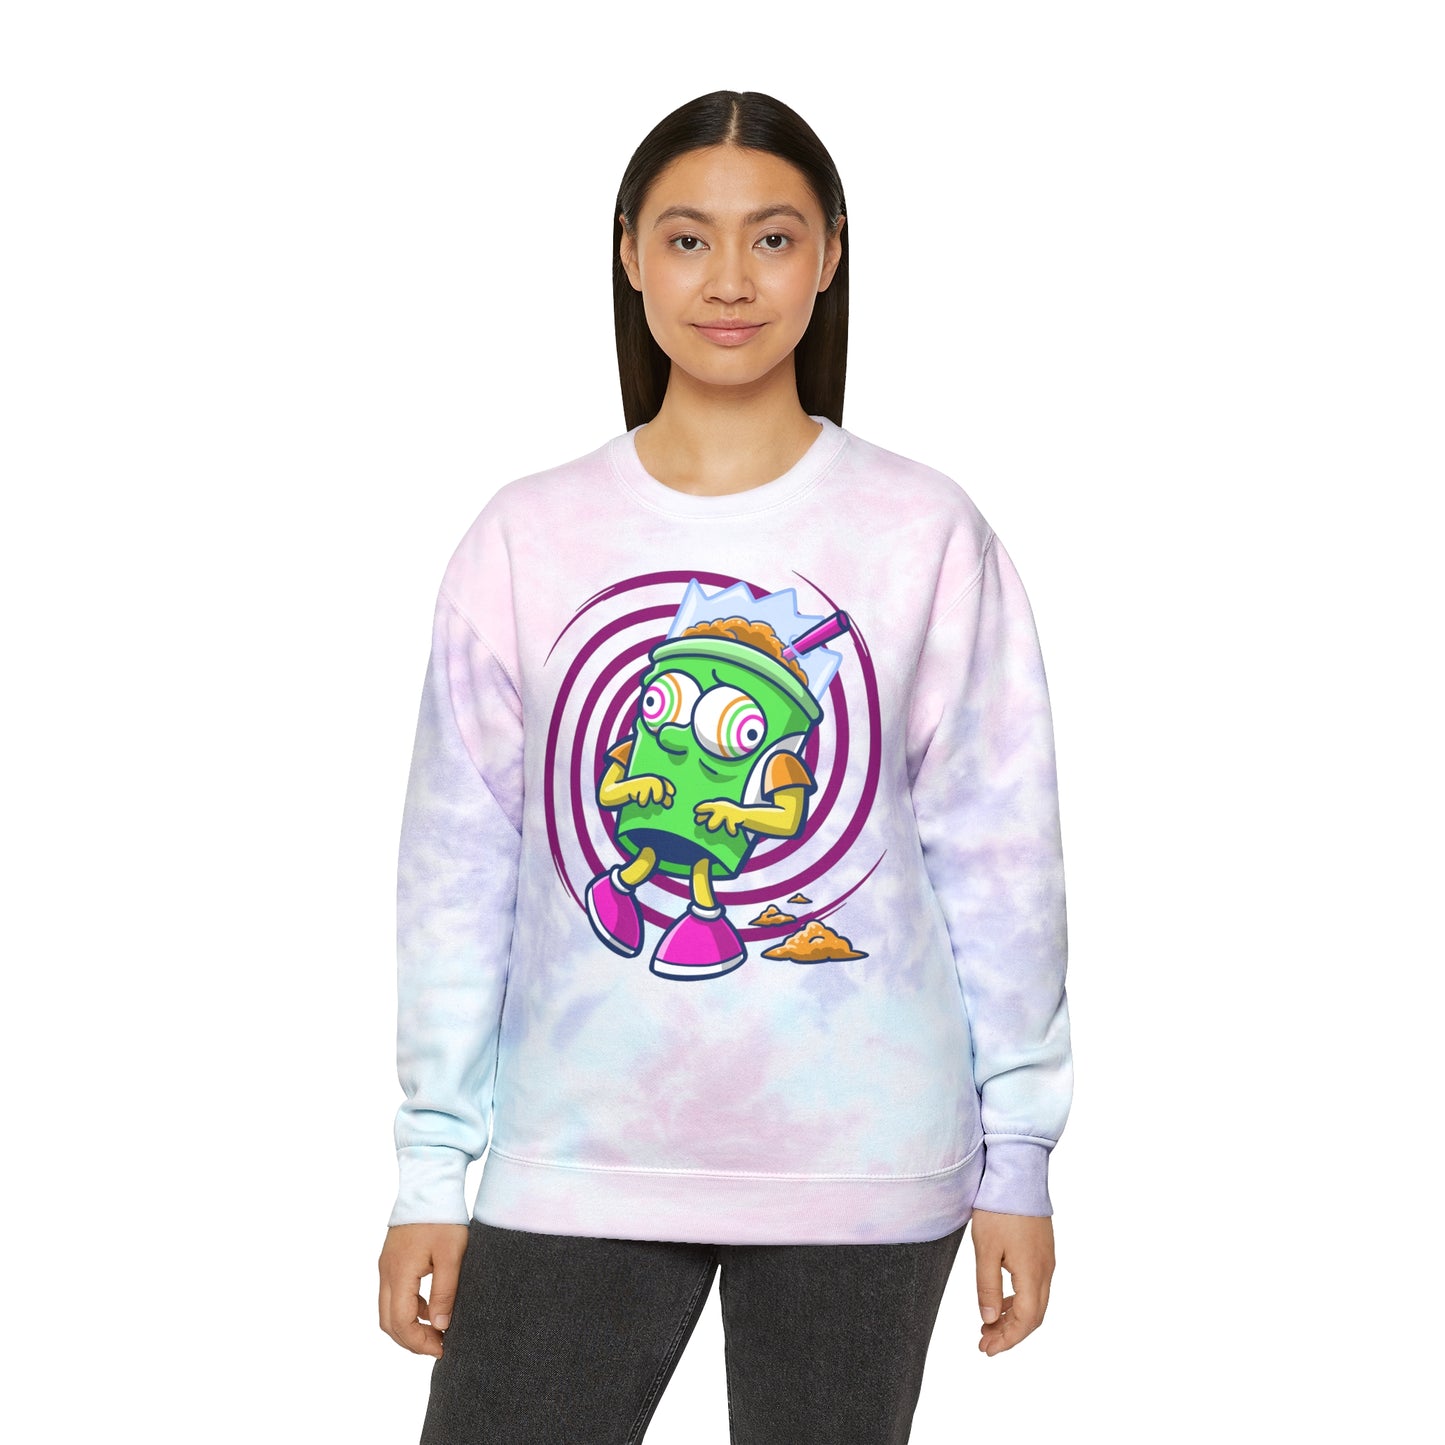 You Are What You Drink Squishee tie-dye sweatshirt